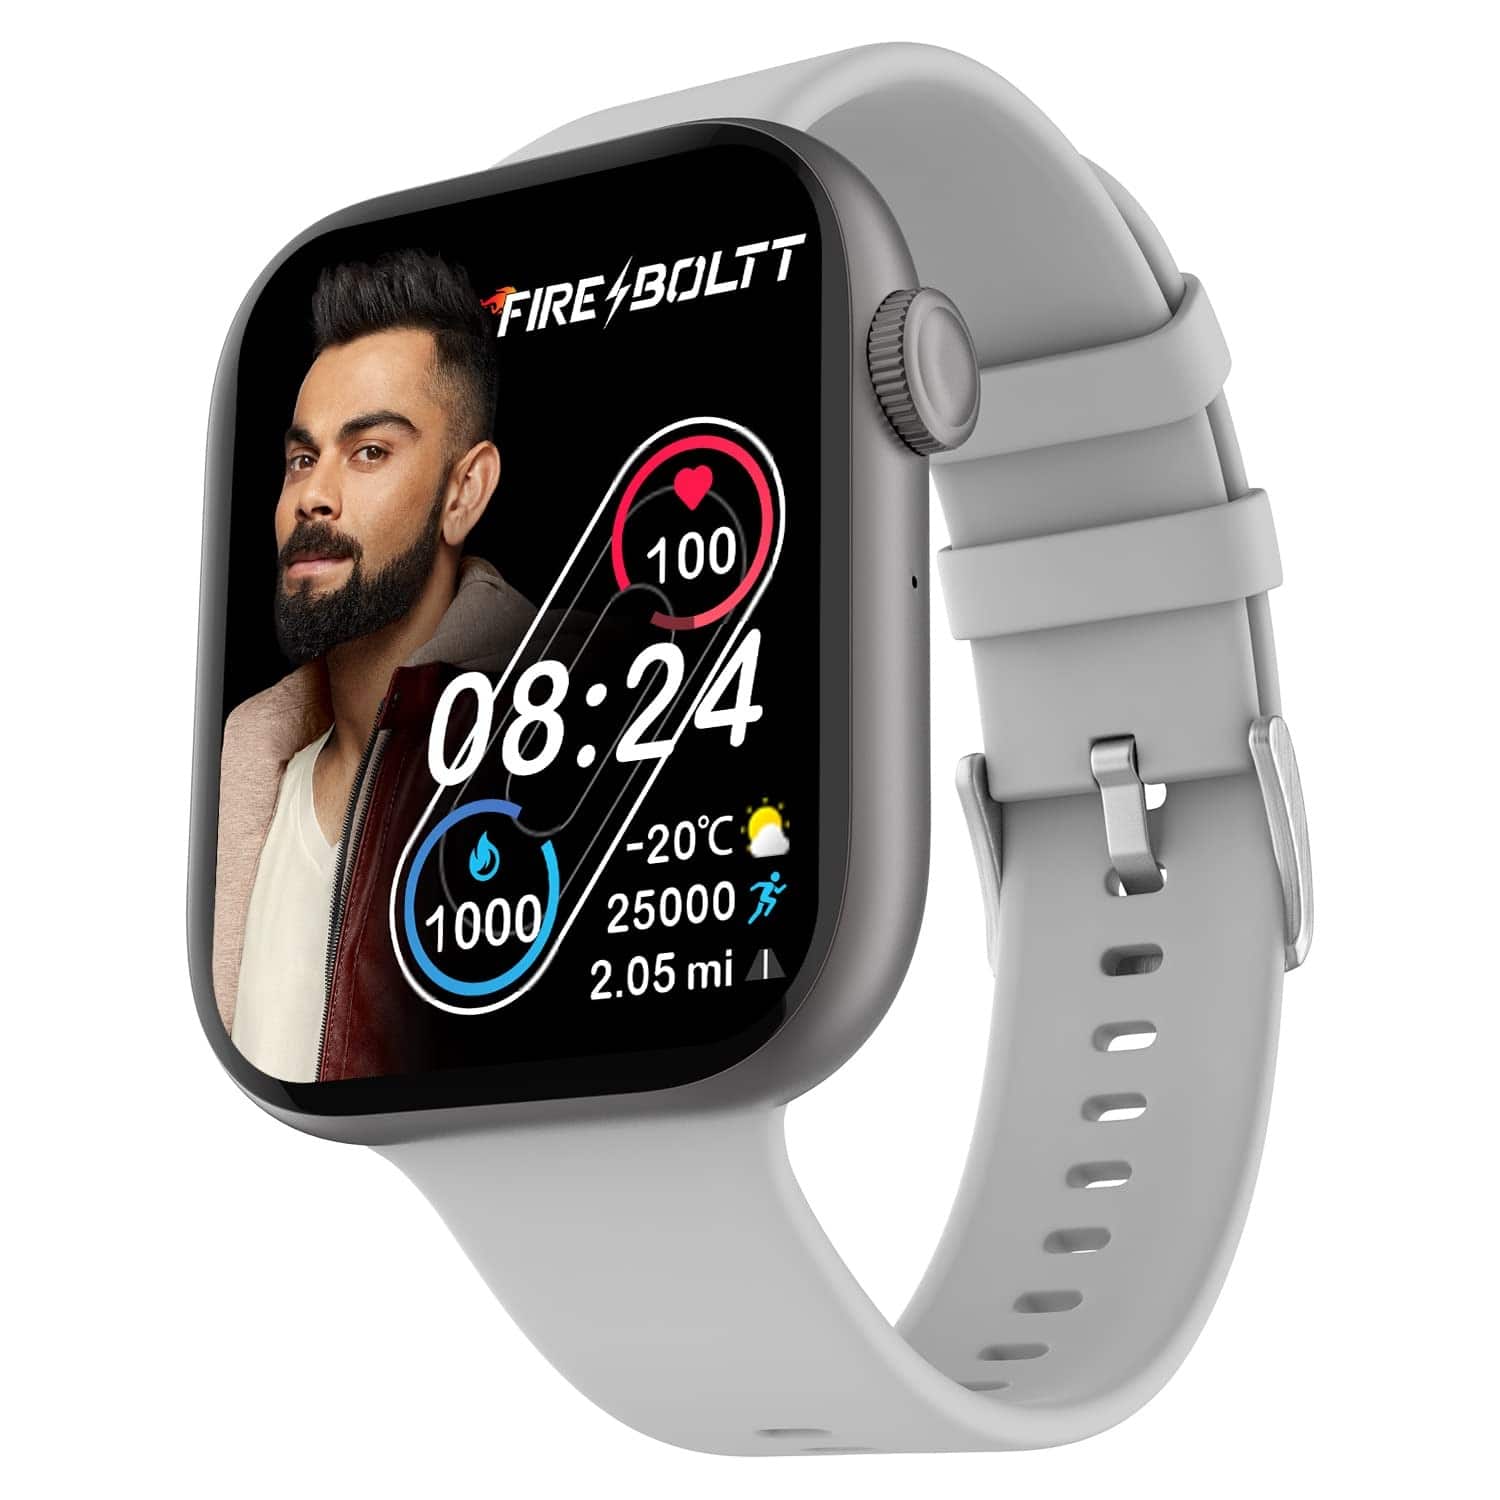 Amazon Great Indian Festival Sale: Great Deals on Latest Top Brand Smart Watches  Fire-Bolt, Fastrack And Boat Under Rs 2000